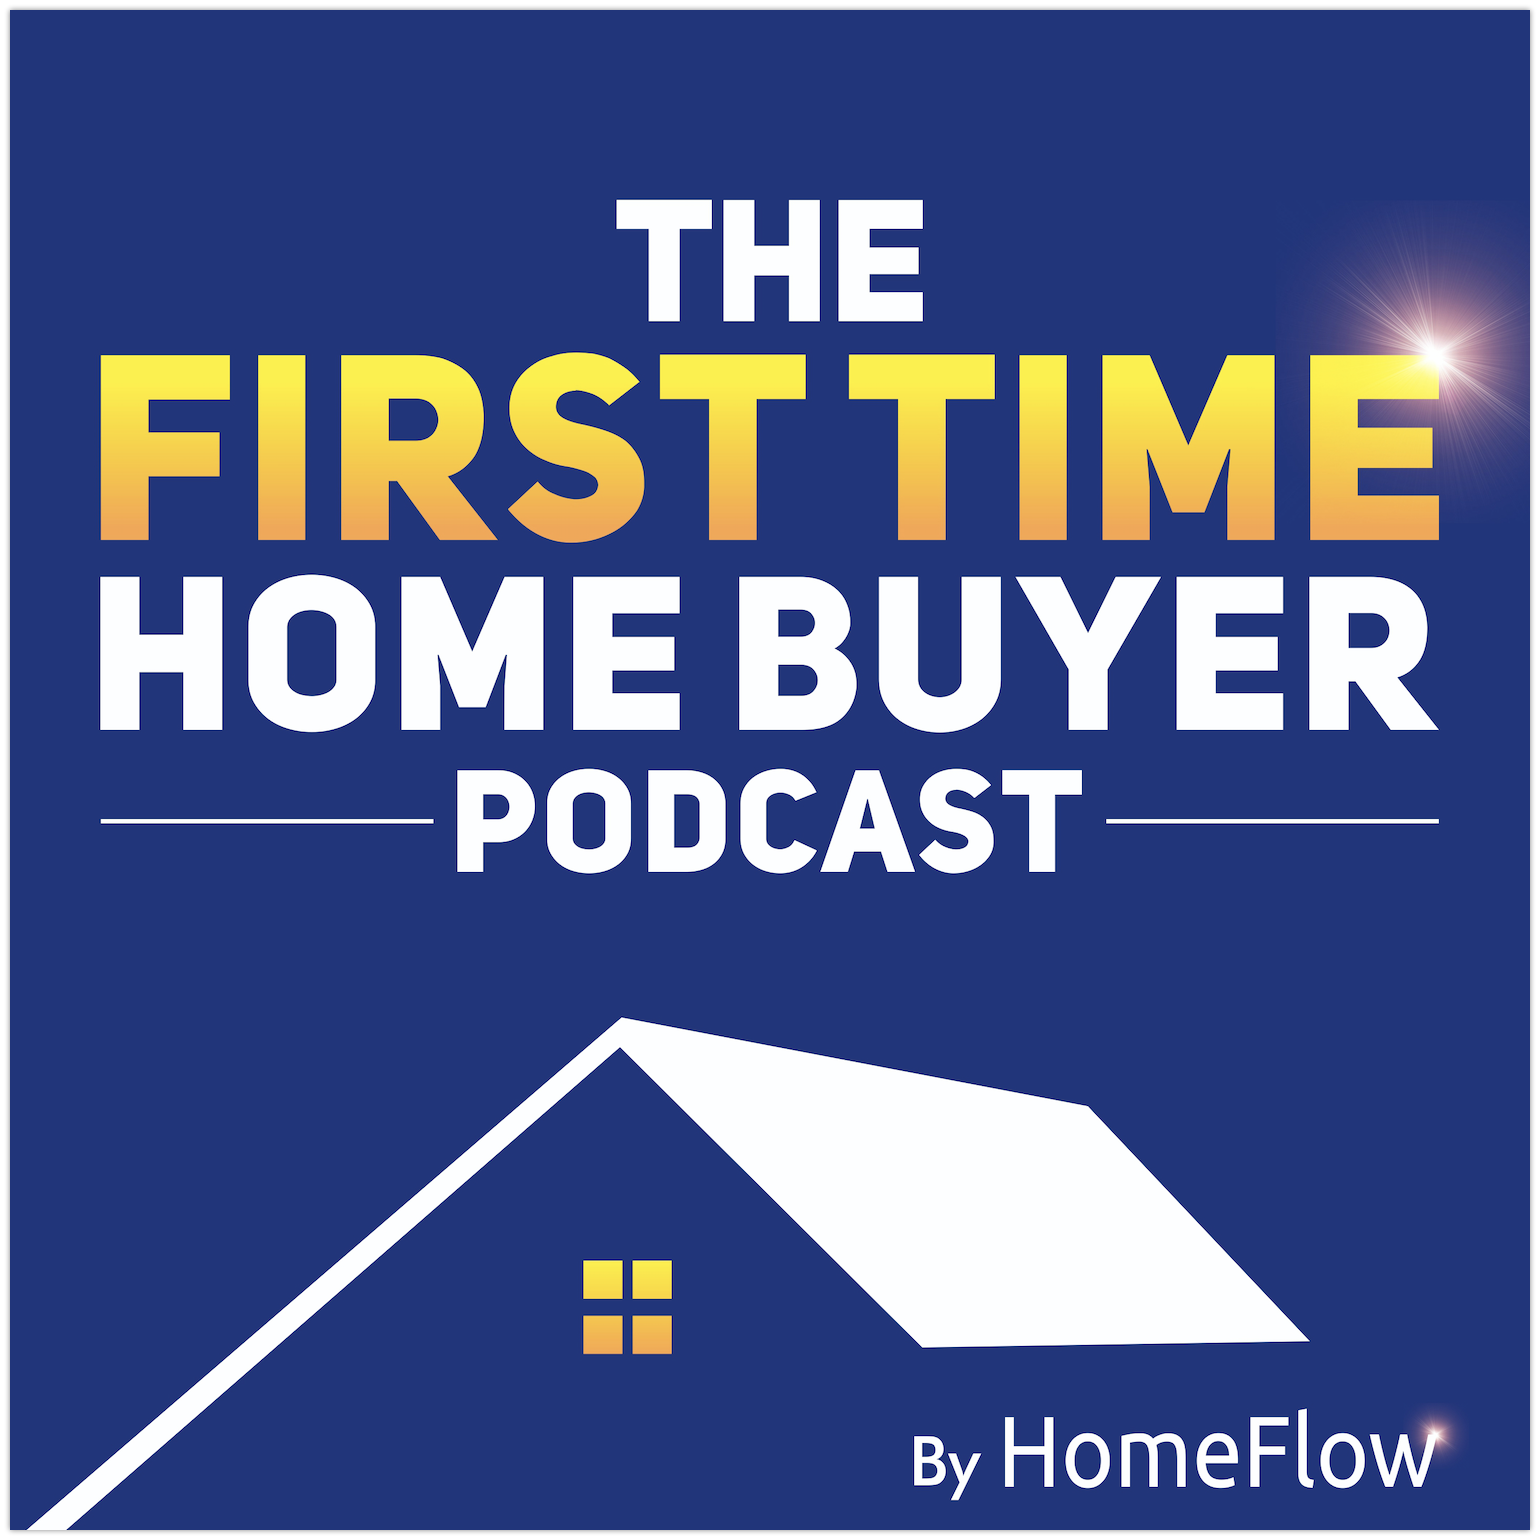 The First Time Home Buyer Podcast